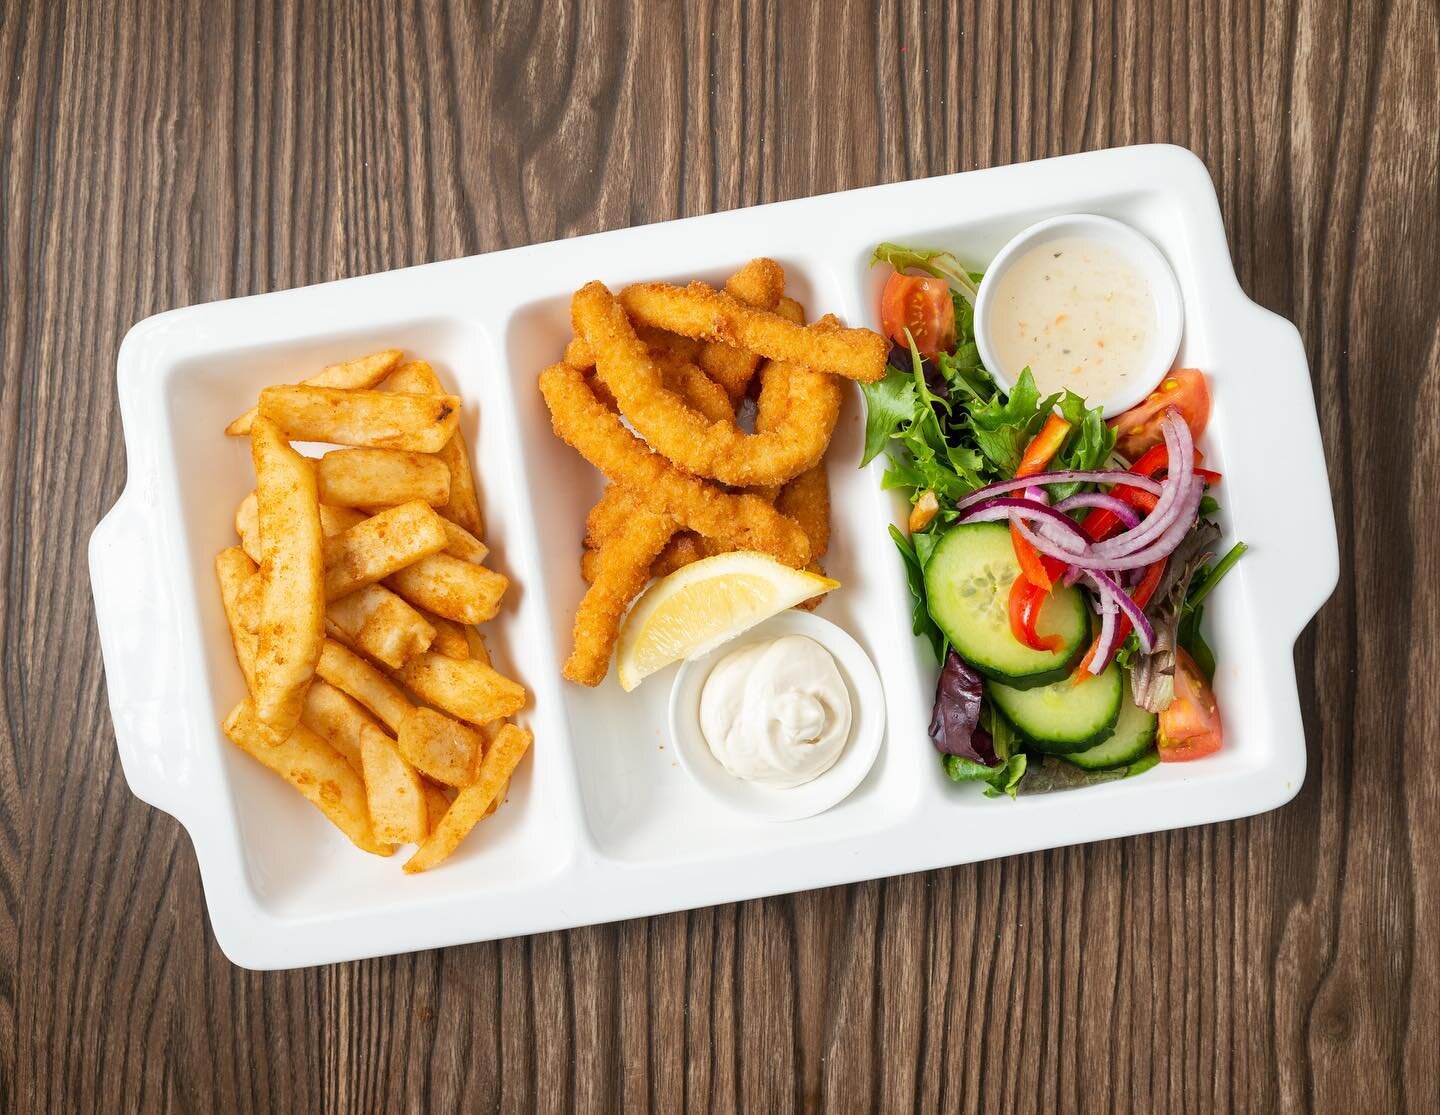 We&rsquo;re going to be running a few specials over the next couple of weeks to keep on celebrating the launch of our new menu! 

Seafood Special 

- Whiting - Half Serve: $15.90
- Whiting - Full Serve: $19.90
- Calamari: $15.90

We&rsquo;ll be runni